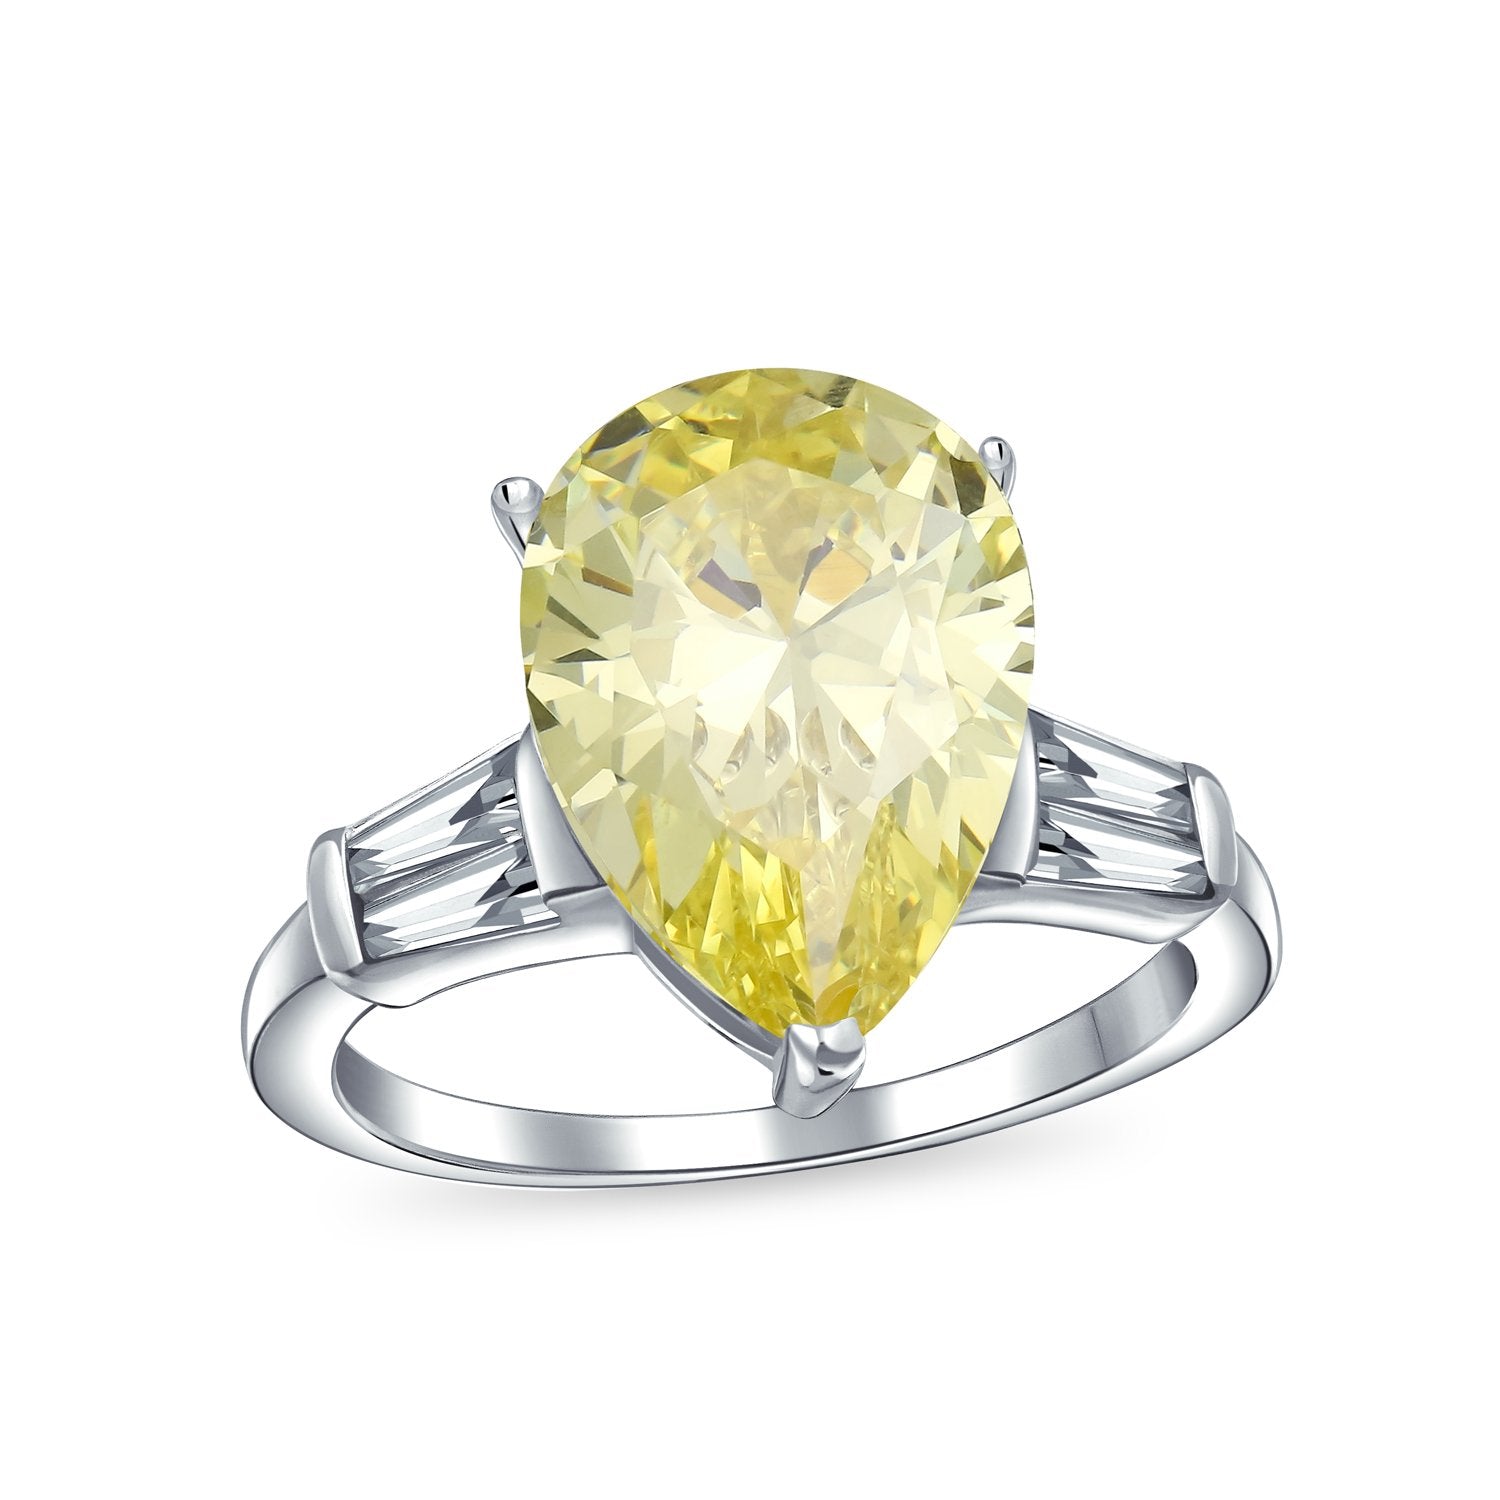 7CT CZ Pear Shape Canary Yellow Solitaire Engagement Ring Side Stones - Joyeria Lady